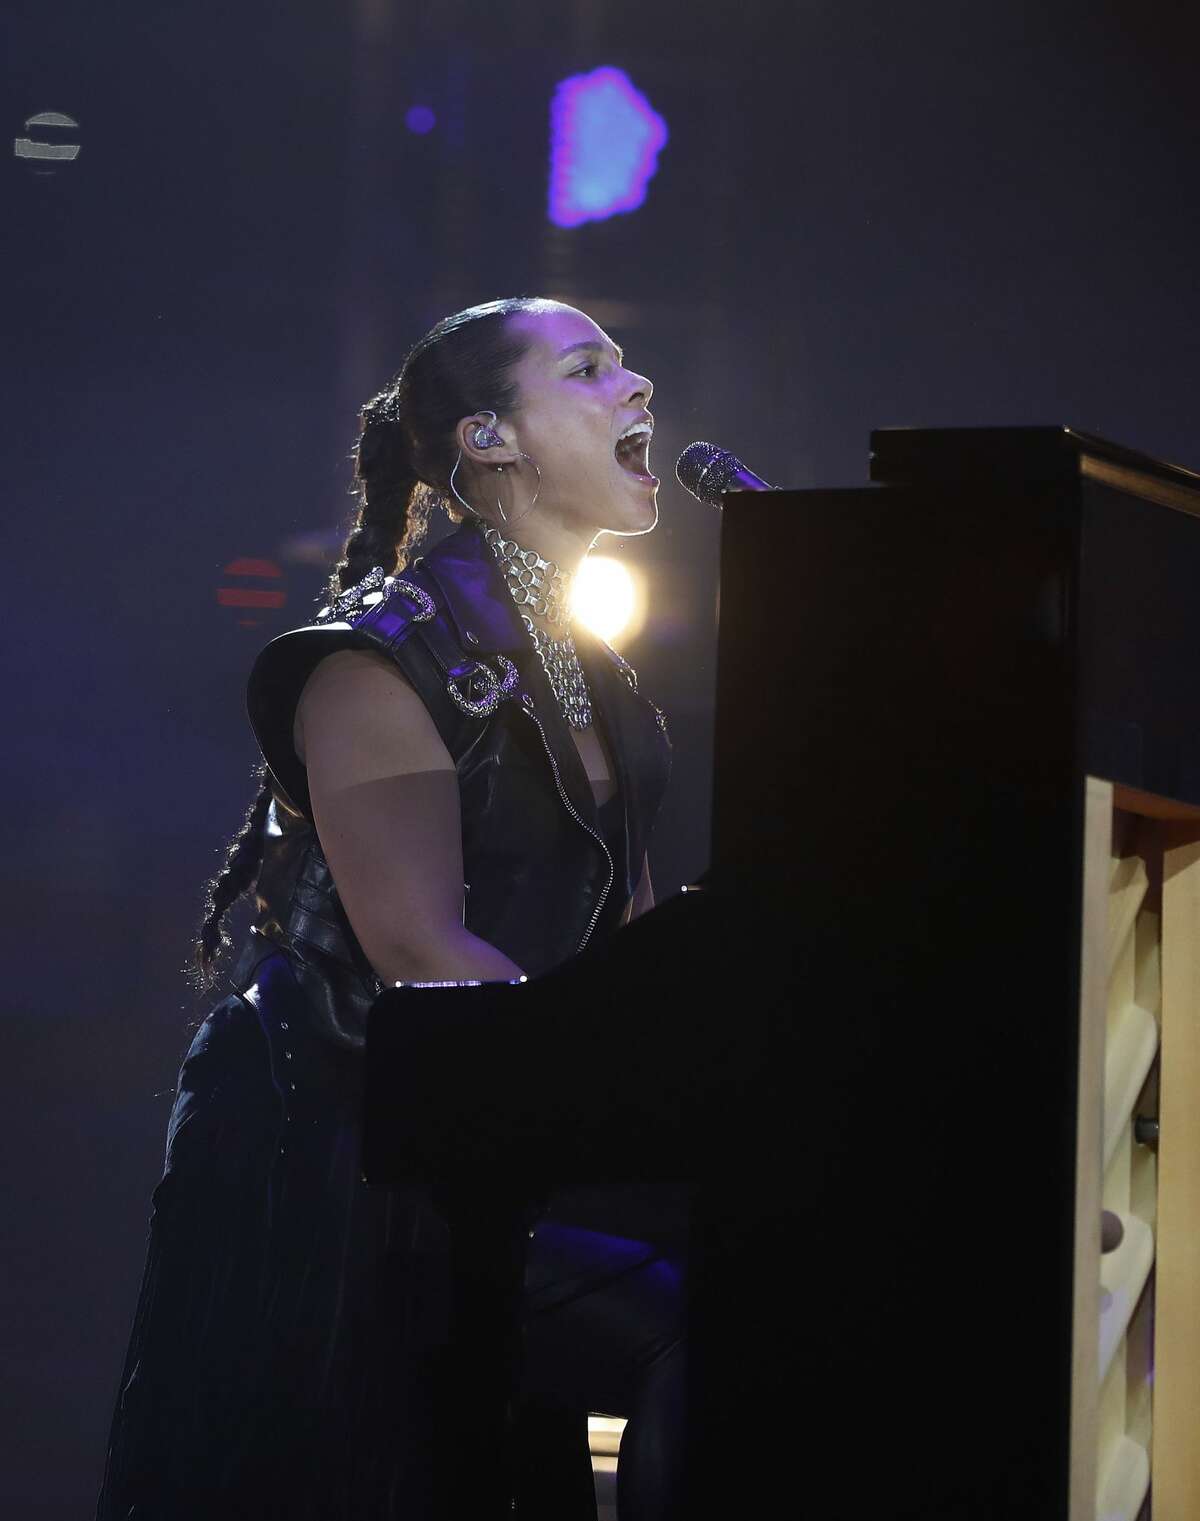 Alicia Keys performs at the Houston Livestock Show and Rodeo, at NRG Park, Friday, March 10, 2017, in Houston. ( Karen Warren / Houston Chronicle )